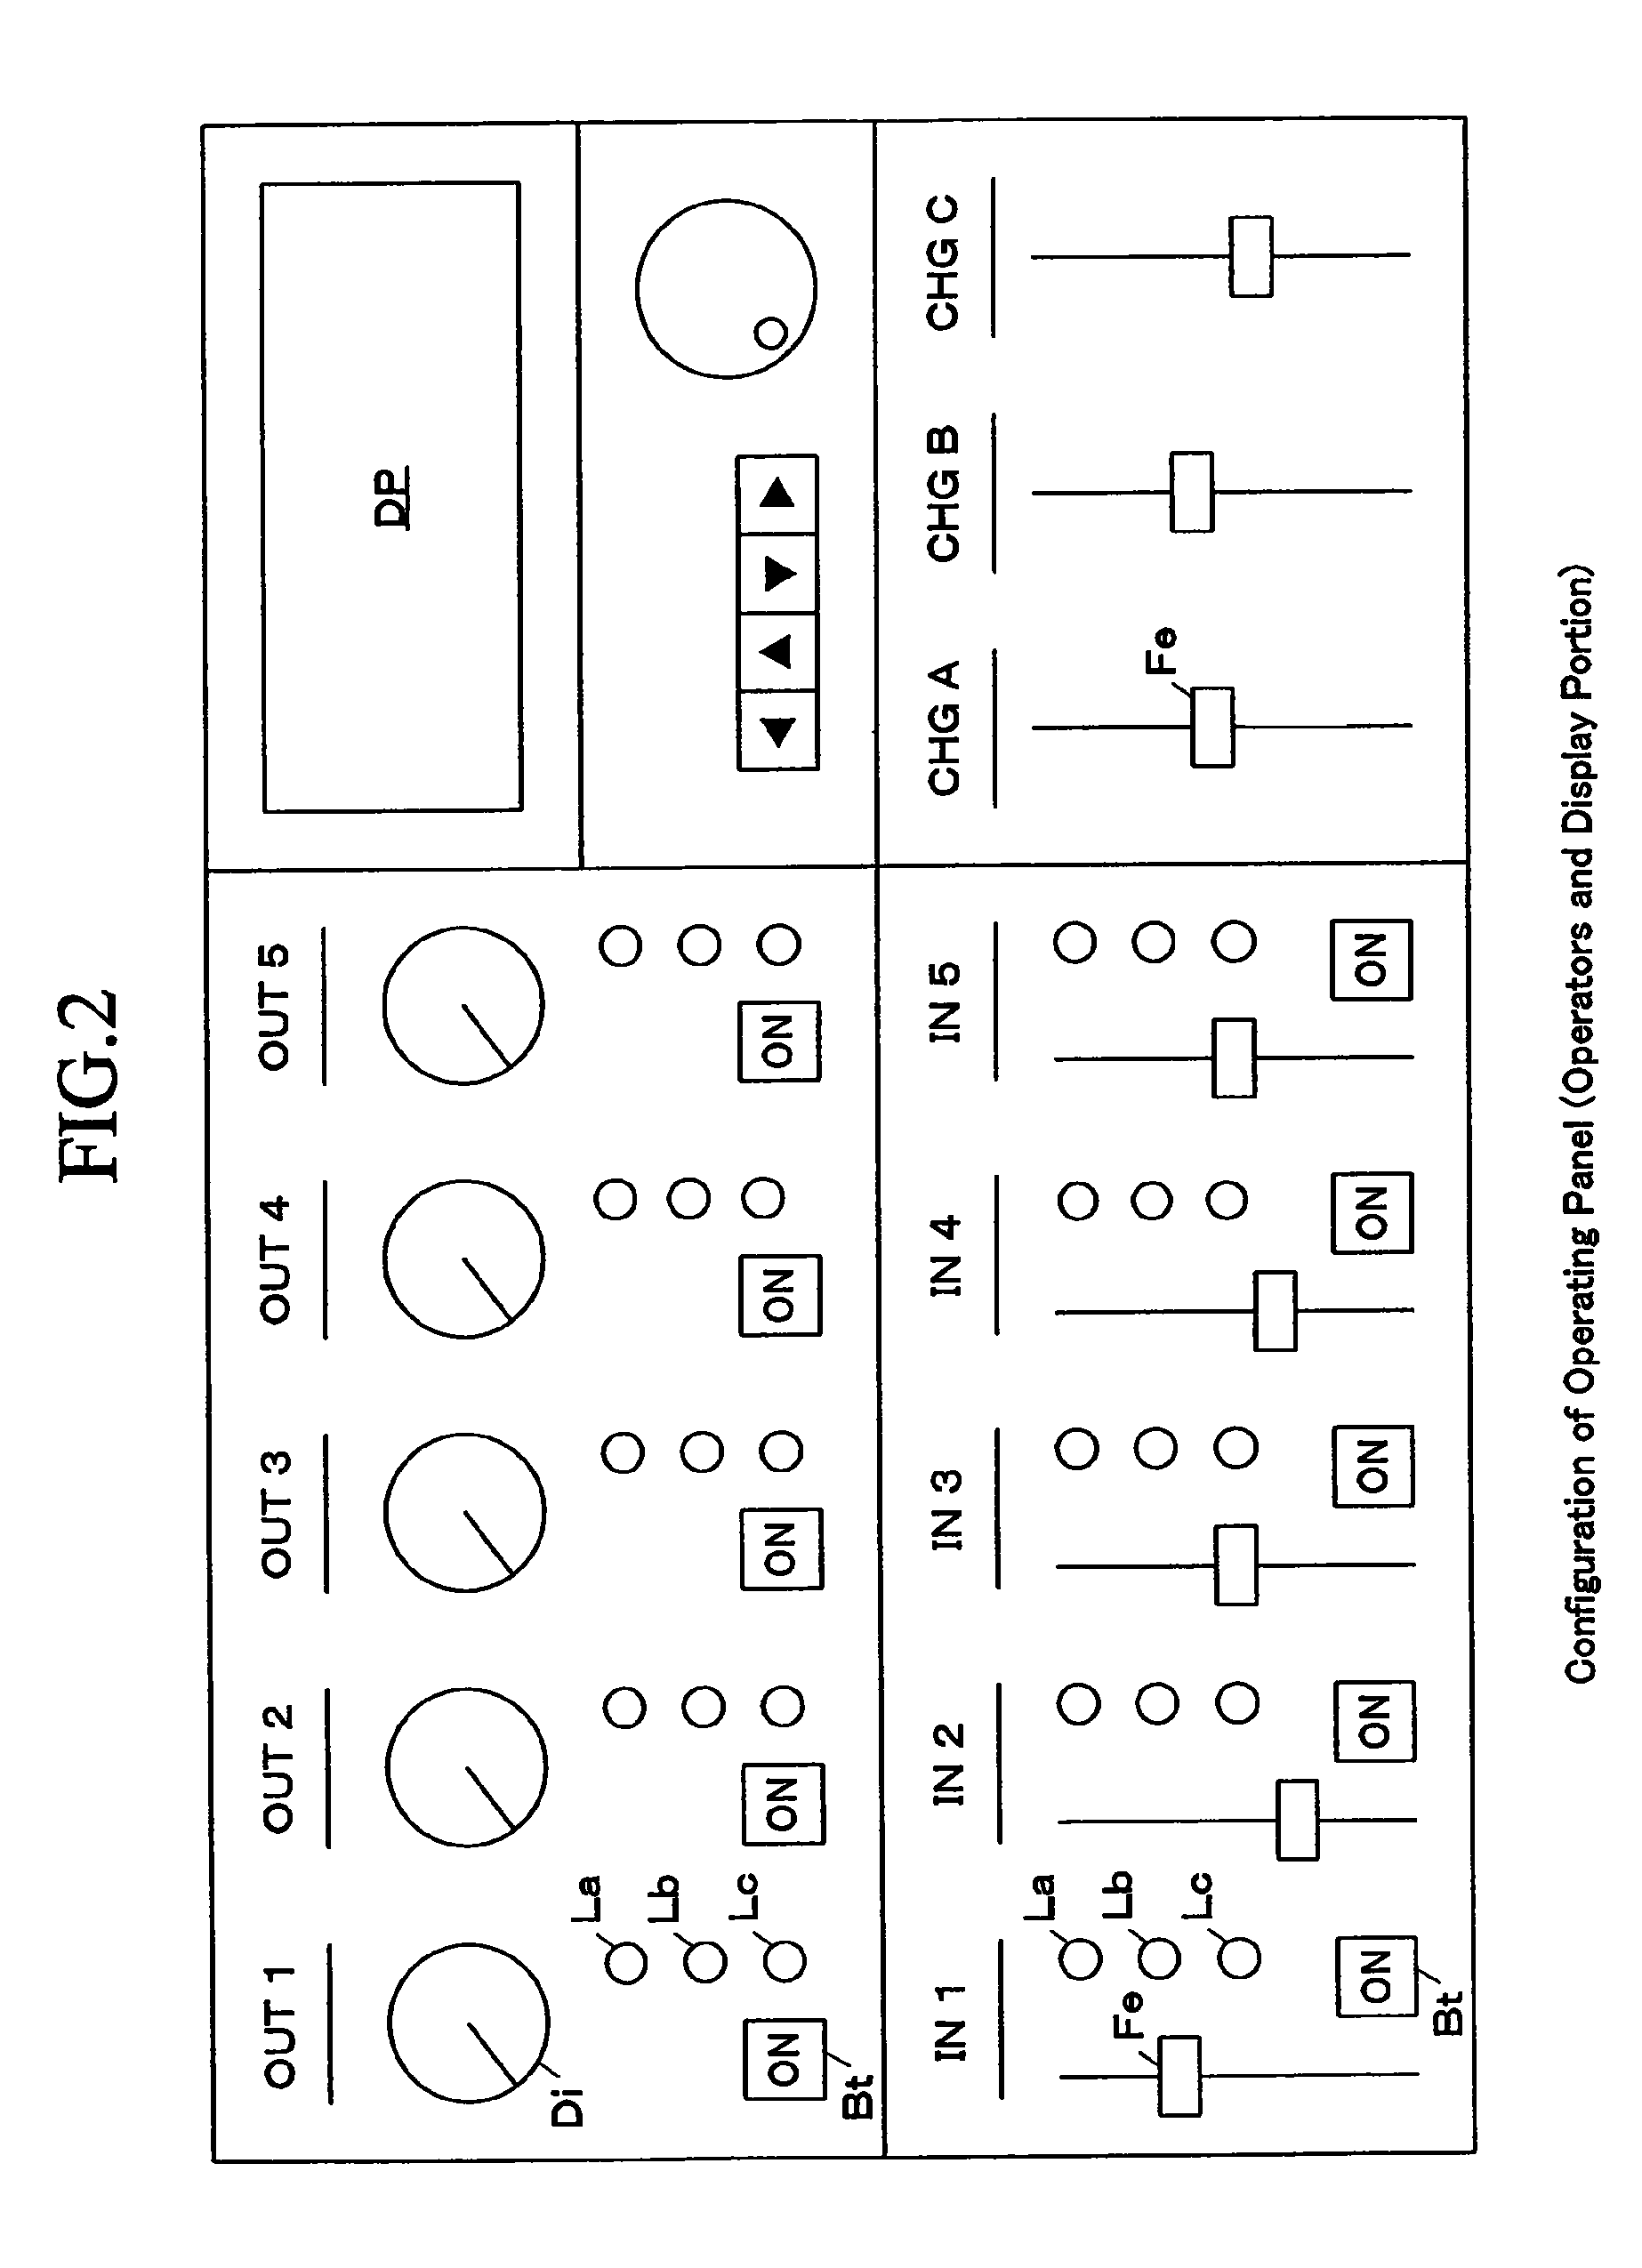 Parameter display controller for an acoustic signal processing apparatus